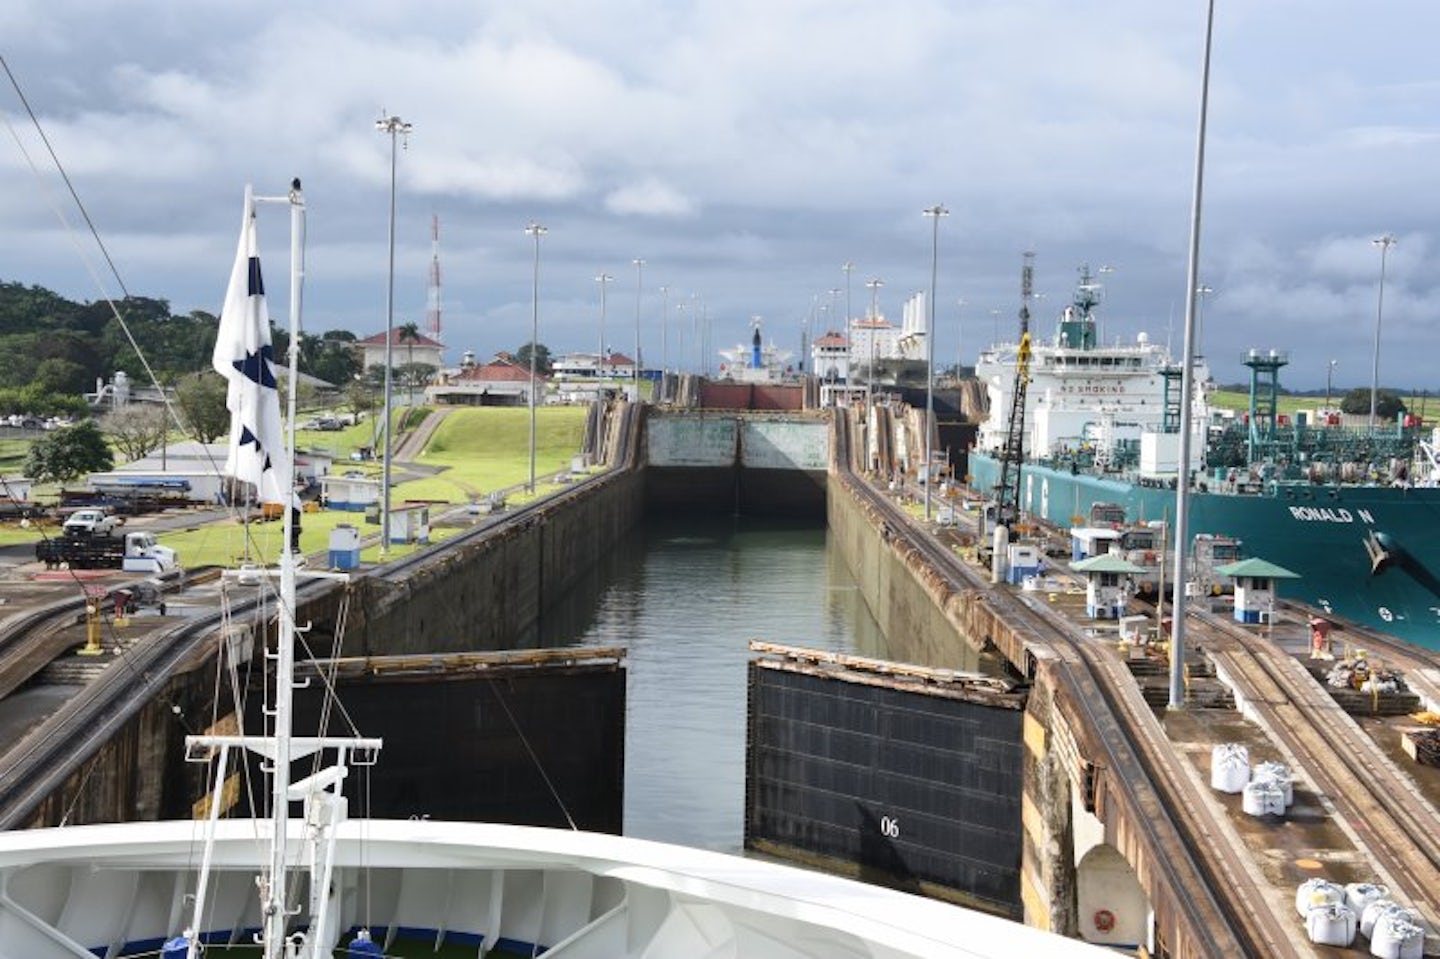 We are about to enter the first set of the Lake Gatun locks at the Panama C